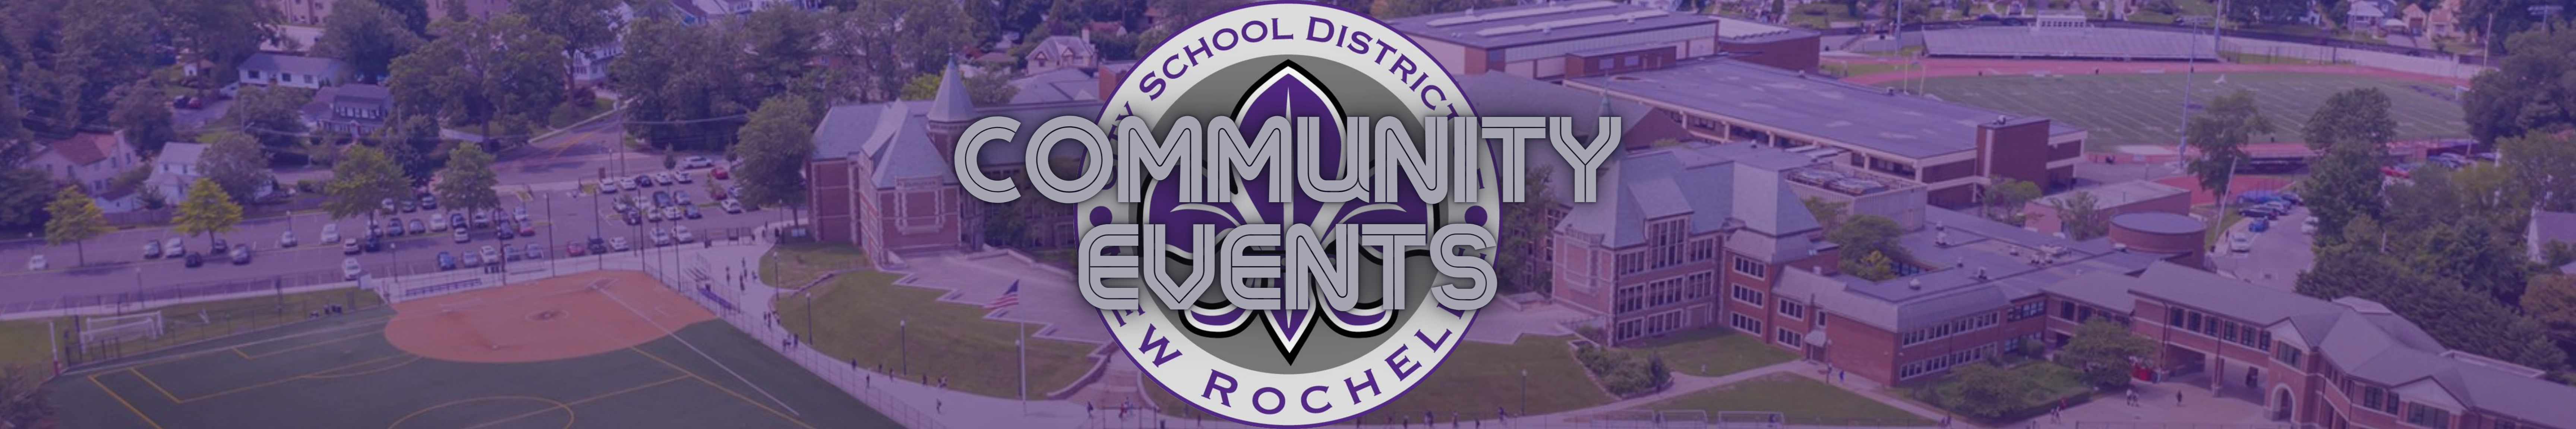 community events banner